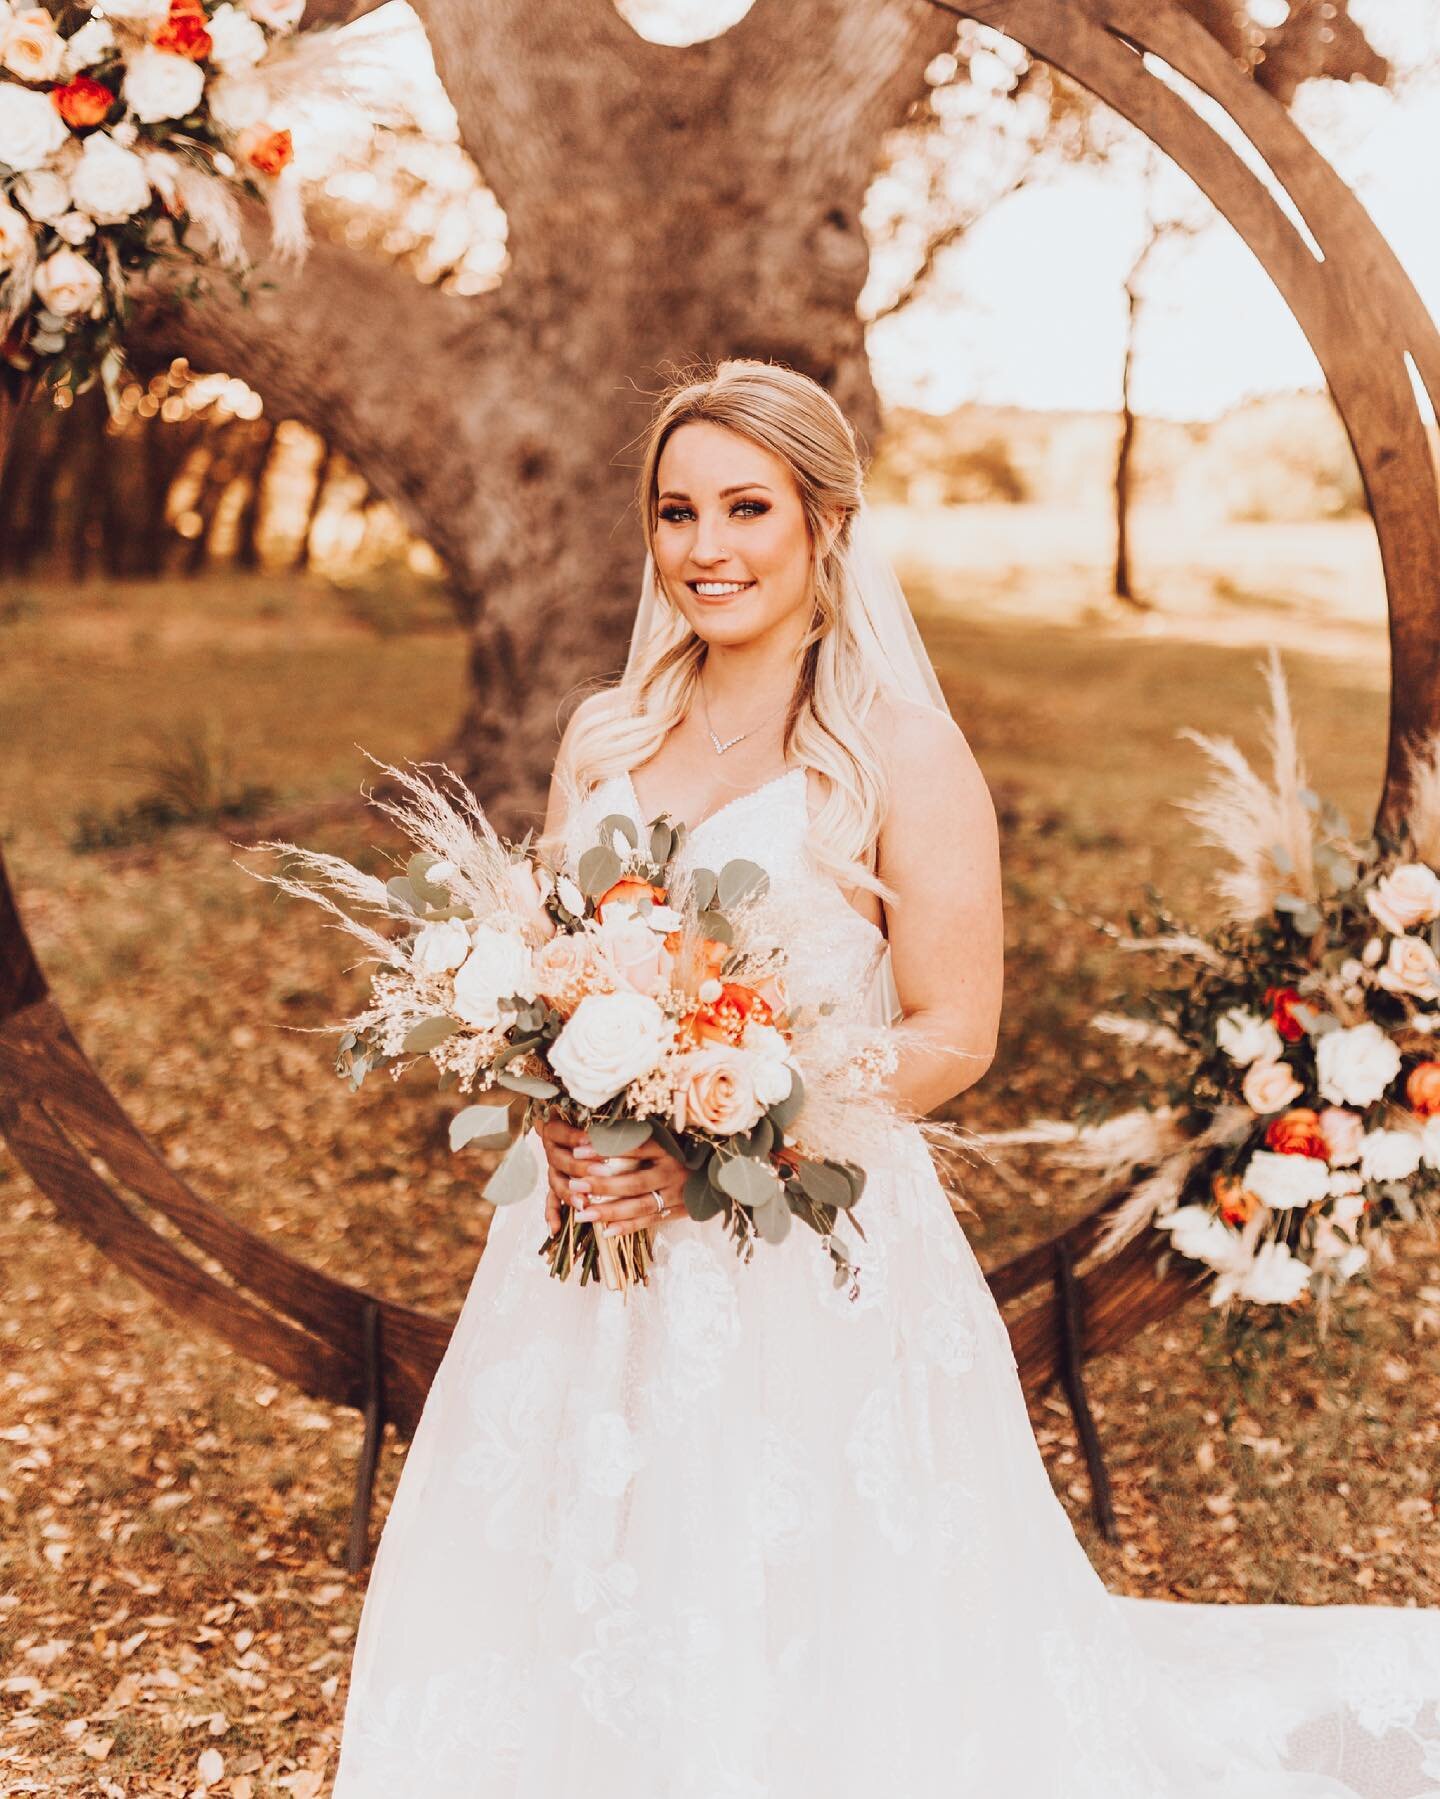 Congratulations Mr. &amp; Mrs. Butcher!!! 🤵🏼&zwj;♂️👰🏼&zwj;♀️❤️
Gorgeous bride Sarah and her bridal party were so sweet and fun to work with!
Hair by me @cypress.gorres 
Makeup by @makeupartistrybysuzanne 
Photo by @lovesparksphoto 
.
.
.
#sananto